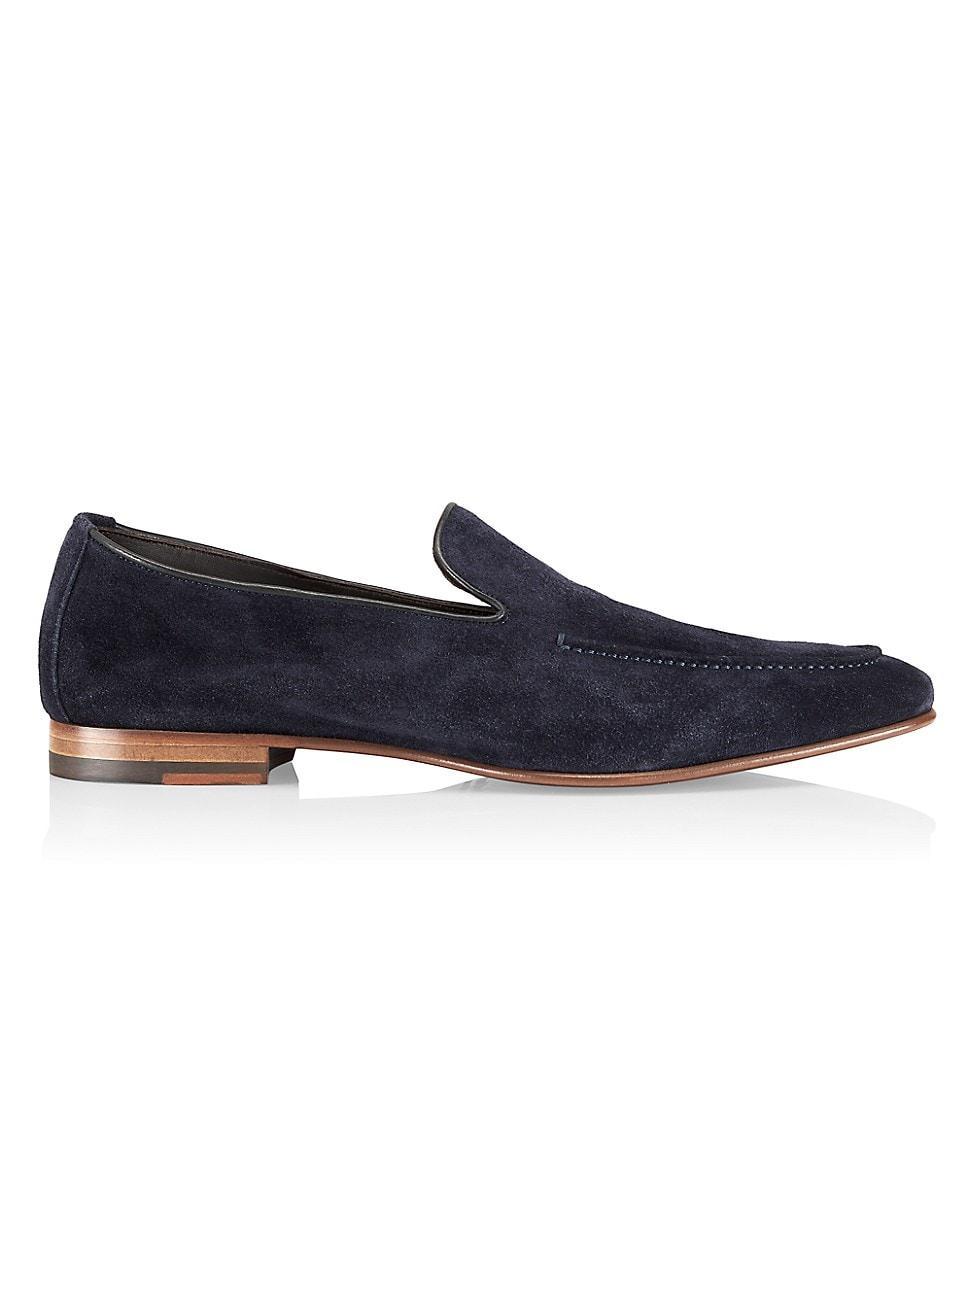 Mens Atlantis Suede Loafers Product Image